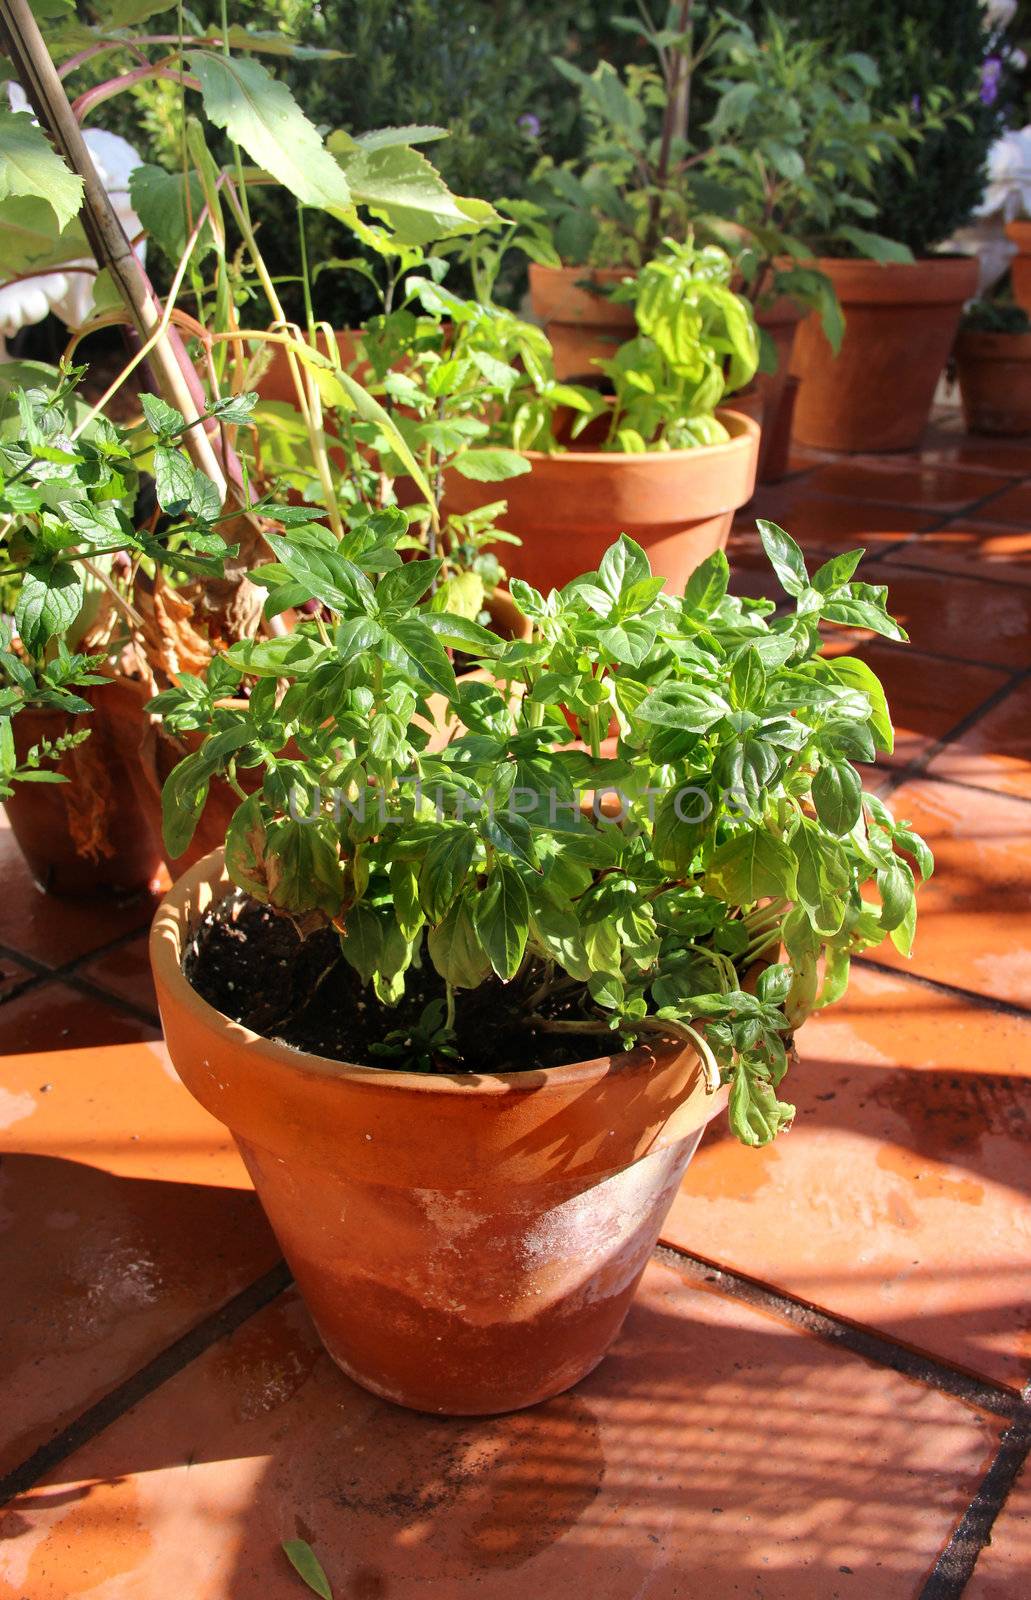 Basil and other herbs in the pot    